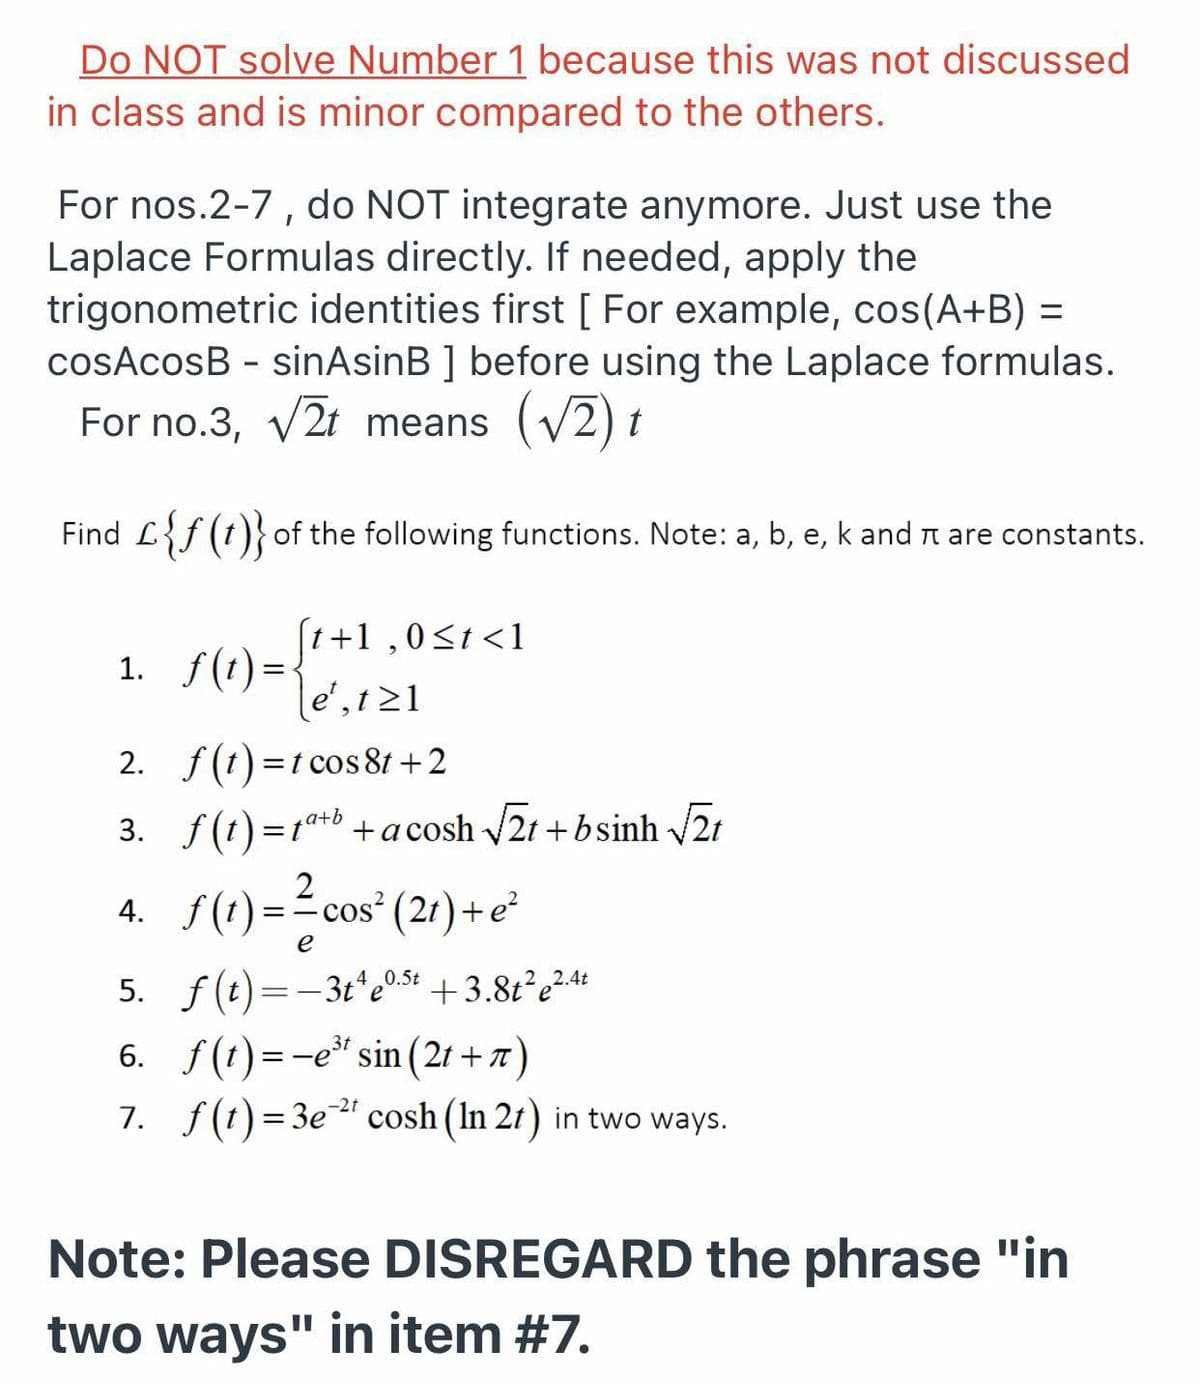 Do NOT solve Number 1 because this was not discussed
in class and is minor compared to the others.
For nos.2-7, do NOT integrate anymore. Just use the
Laplace Formulas directly. If needed, apply the
trigonometric identities first [ For example, cos(A+B) =
cosAcosB - sinAsinB ] before using the Laplace formulas.
For no.3, v2t means (V2) t
Find L{f (t)} of the following functions. Note: a, b, e, k and n are constants.
(t+1 ,0<t<1
1. f(1) =-
le',t21
2. f(1) =t cos 81 +2
3. f(t) =1t+b +acosh 2t +bsinh /21
4. ()-2 cos" (21)-*
e
5. f(t)=-3t*e0s4 +3.8t²e²4+
6. f(t)=-e" sin (21 + 7)
7. f(t)= 3e" cosh (In 21) in two ways.
4 0.5t
2.4t
-2t
%3D
Note: Please DISREGARD the phrase "in
two ways" in item #7.
